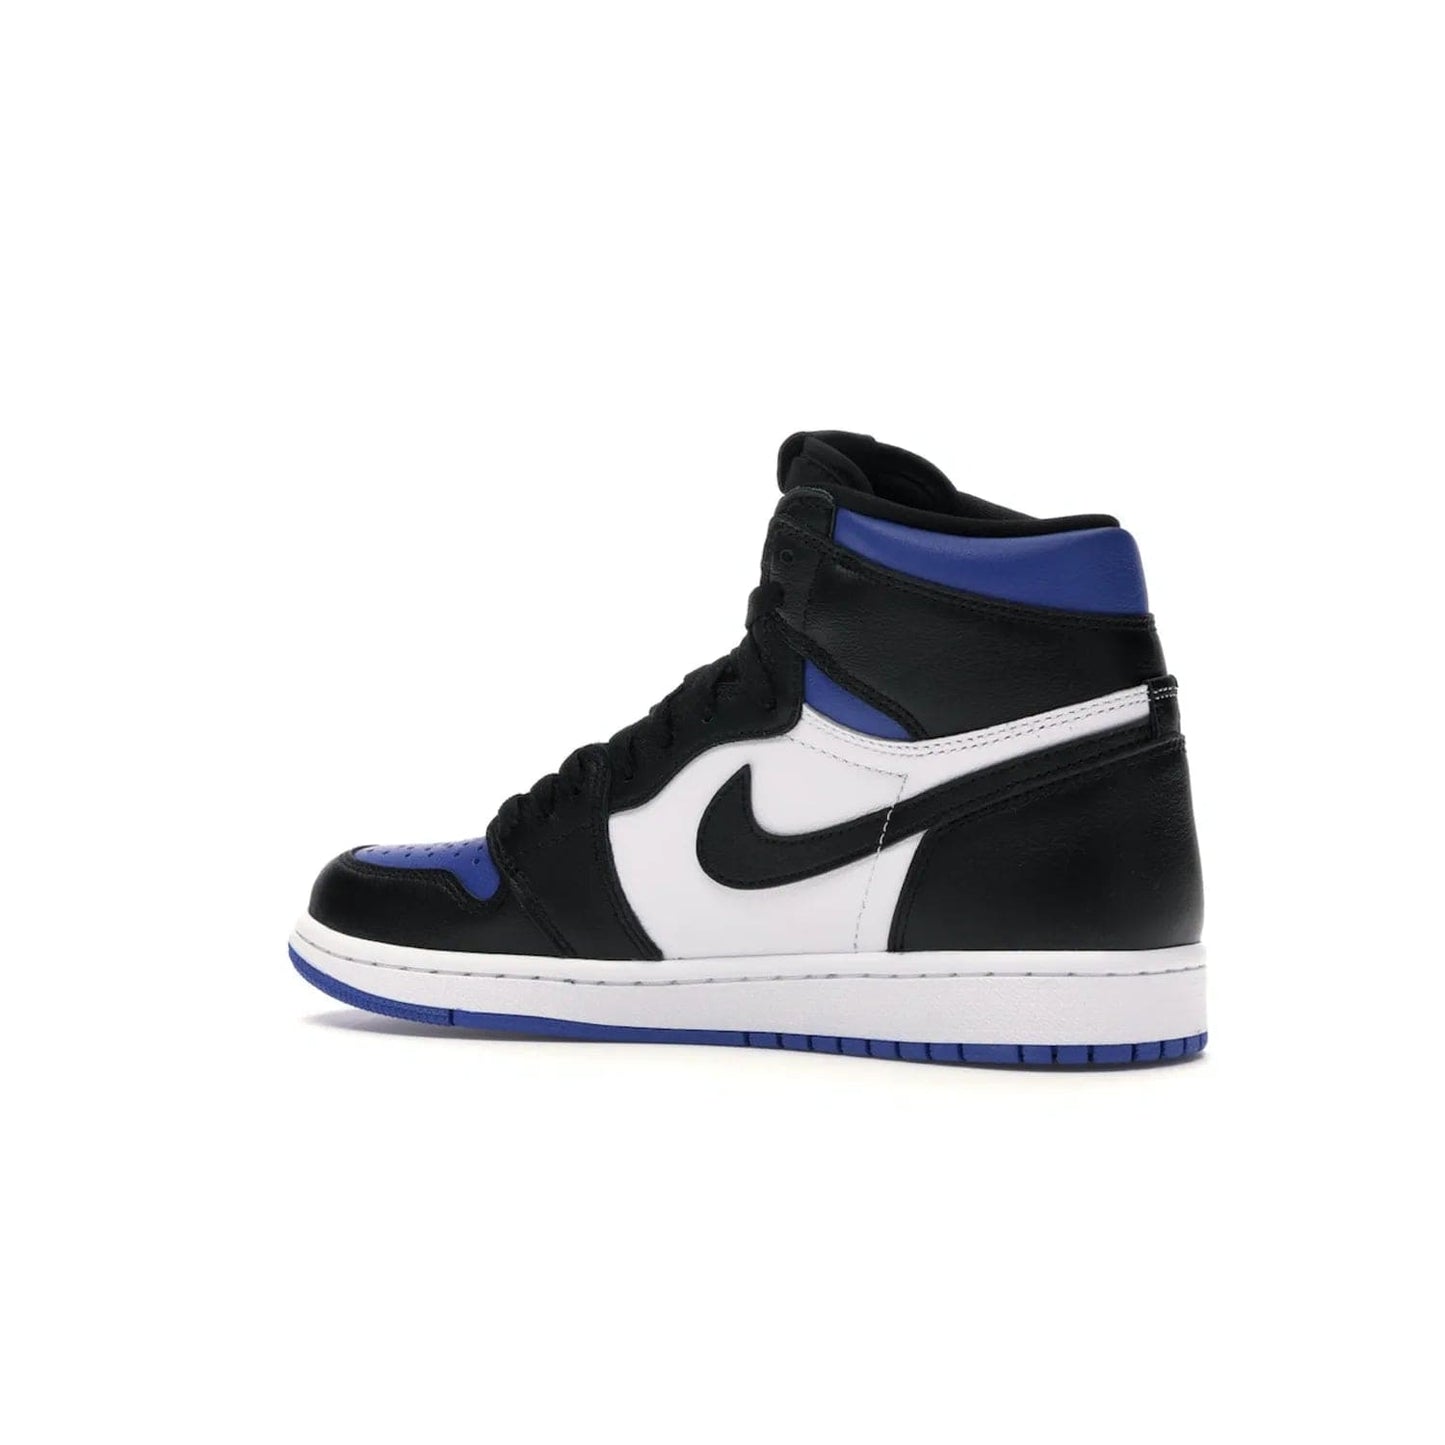 Jordan 1 Retro High Royal Toe - Image 22 - Only at www.BallersClubKickz.com - Refresh your look with the Jordan 1 Retro High Royal Toe. This classic AJ 1 sports a white and royal leather upper, black leather overlays, and branded leather tongue tag. Pick up today and set the streets ablaze.